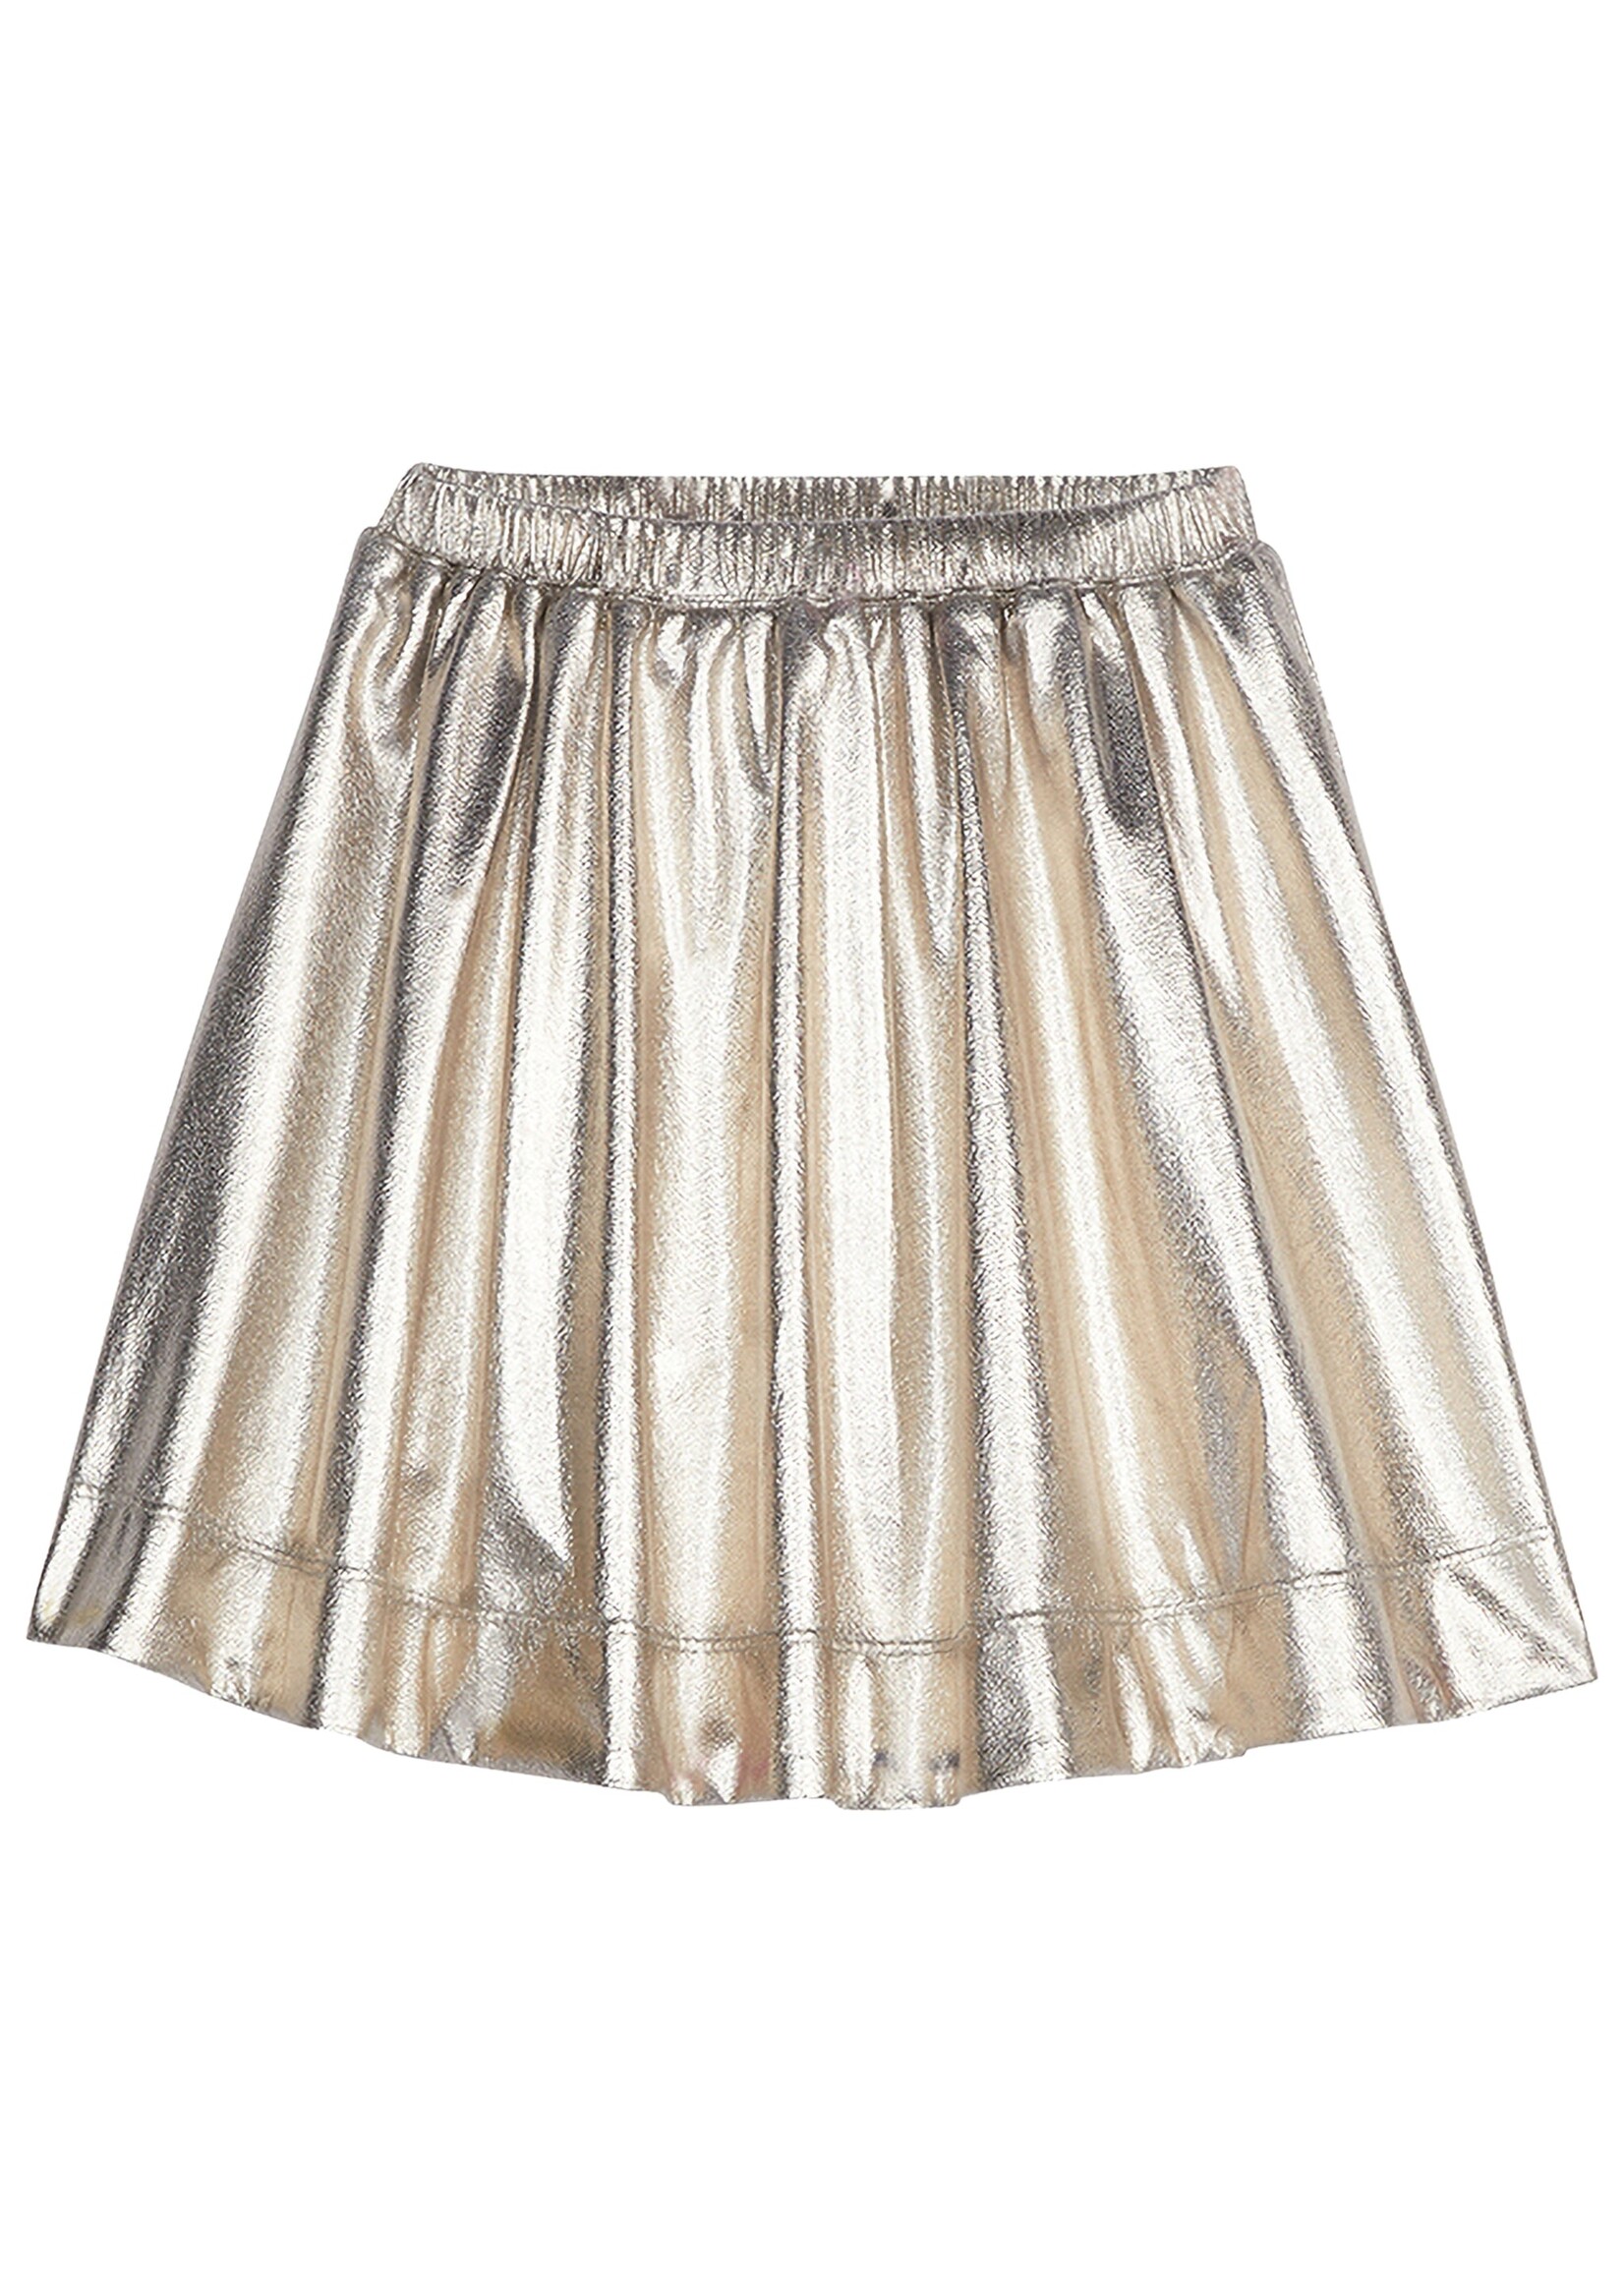 Bisby Bisby Circle Skirt Gold Lame